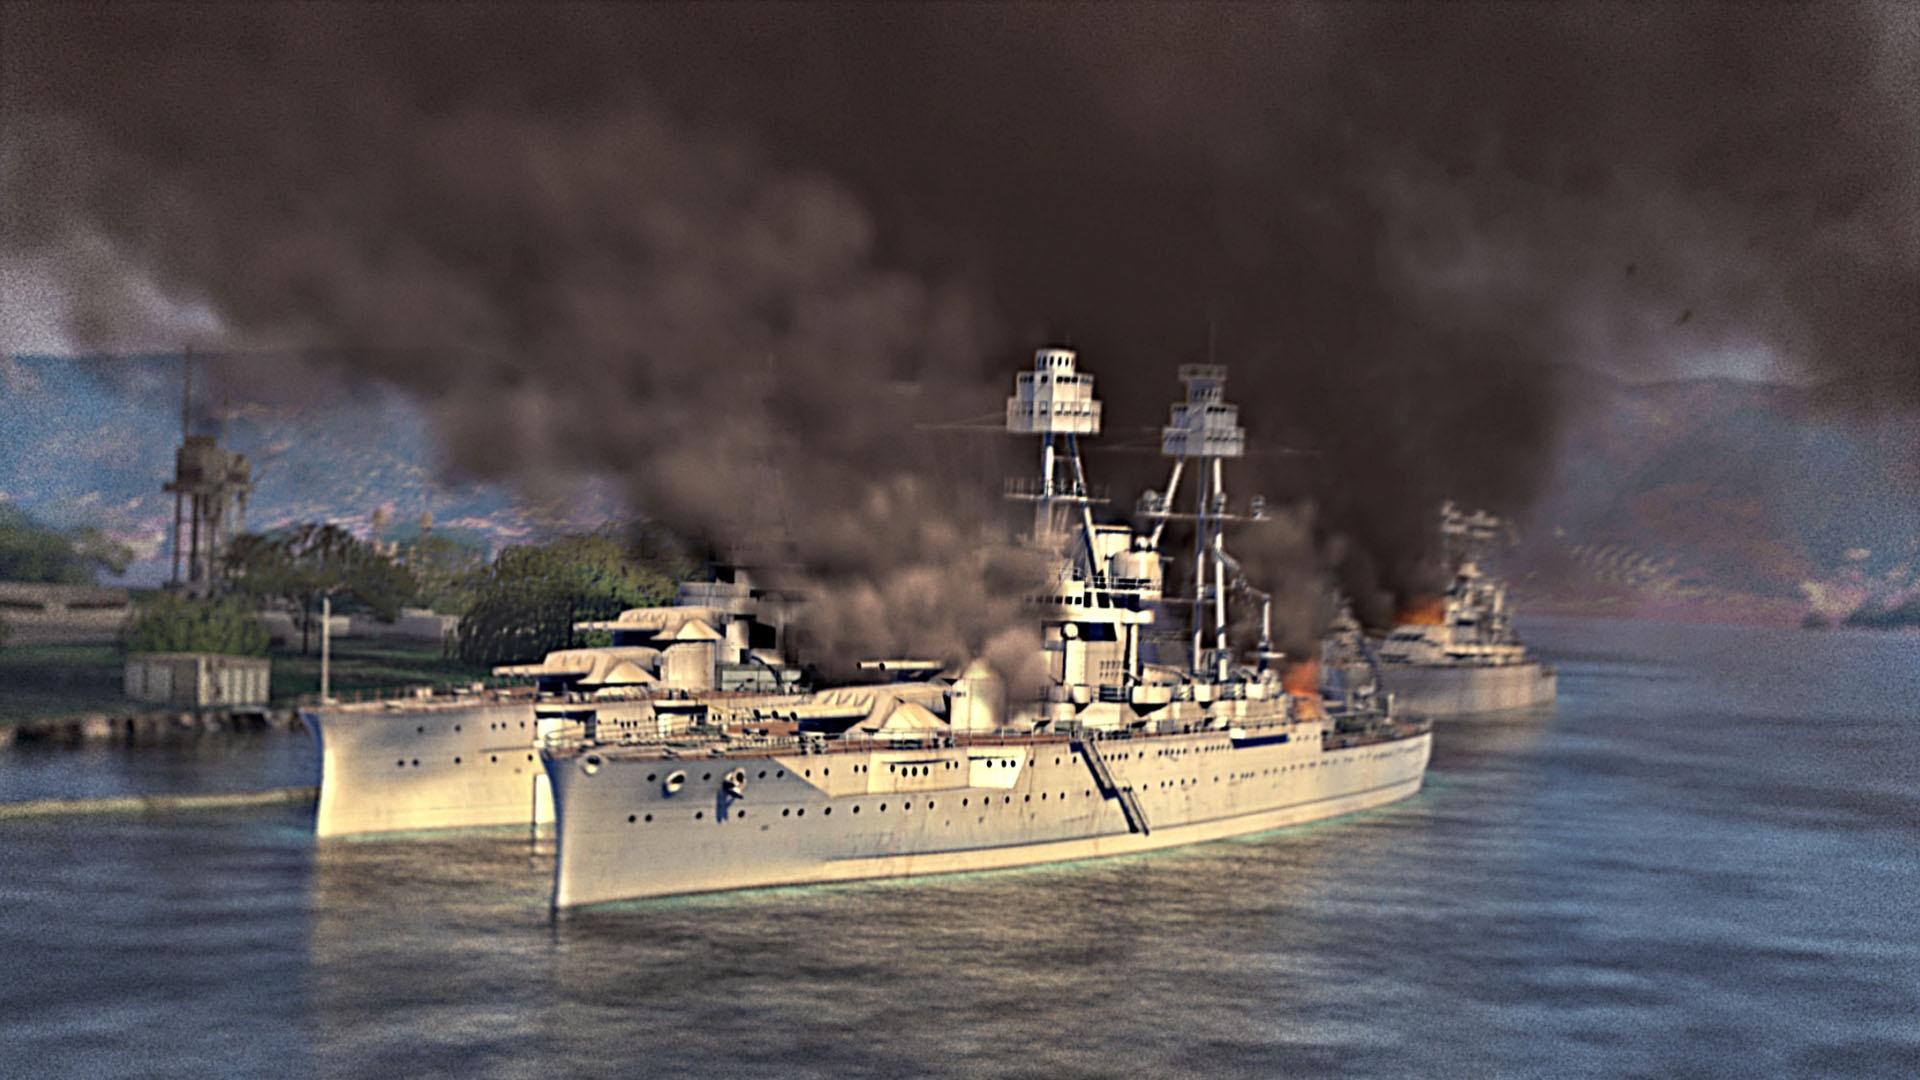 Animation showing the USS Oklahoma after being hit by torpedos, smoking, and on fire.